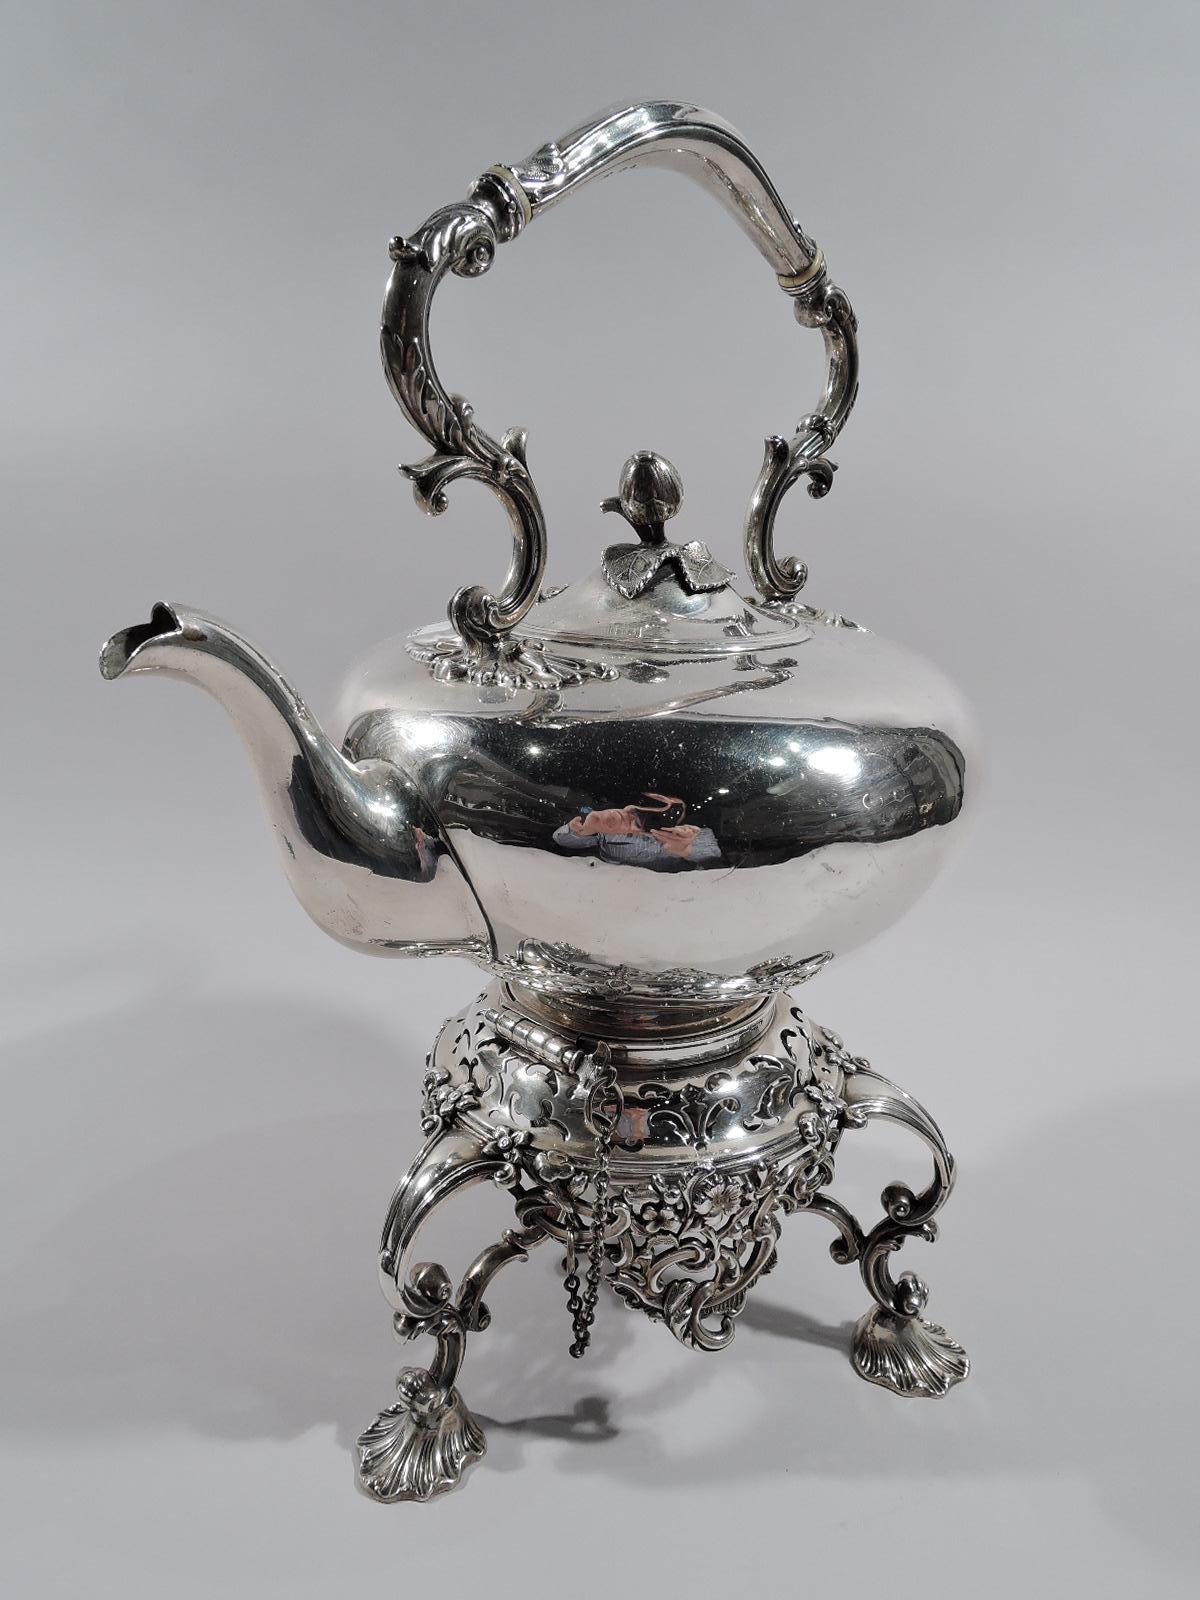 Victorian sterling silver kettle on stand. Made by James & Nathaniel Creswick in Sheffield in 1855. Kettle: Ovoid with s-scroll and reeded foot; cover hinged and domed with scroll and leaf mounts and cast bud finial; leaf-capped and scrolled